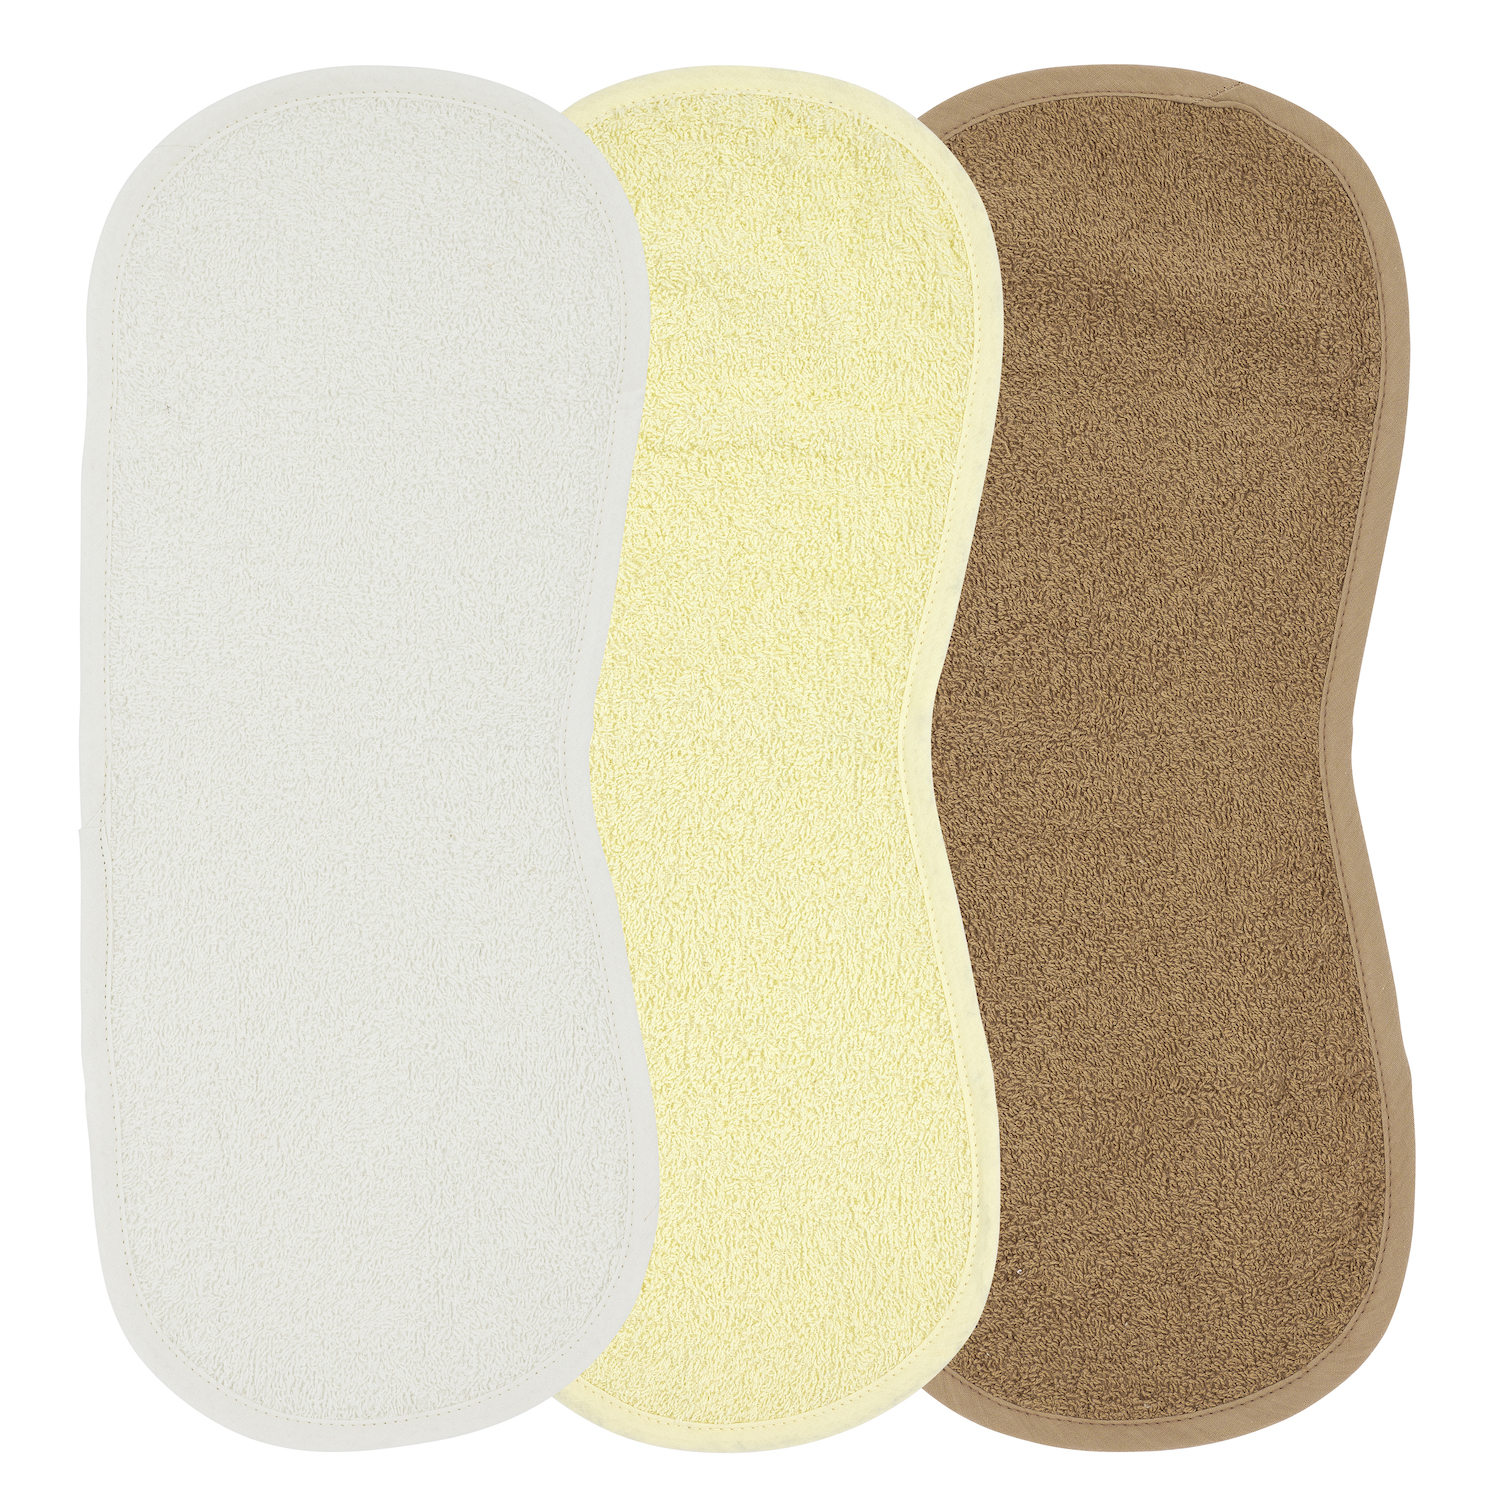 Spucktuch XL Frottee 3-pack  - Offwhite/Soft Yellow/Toffee - 53x20cm